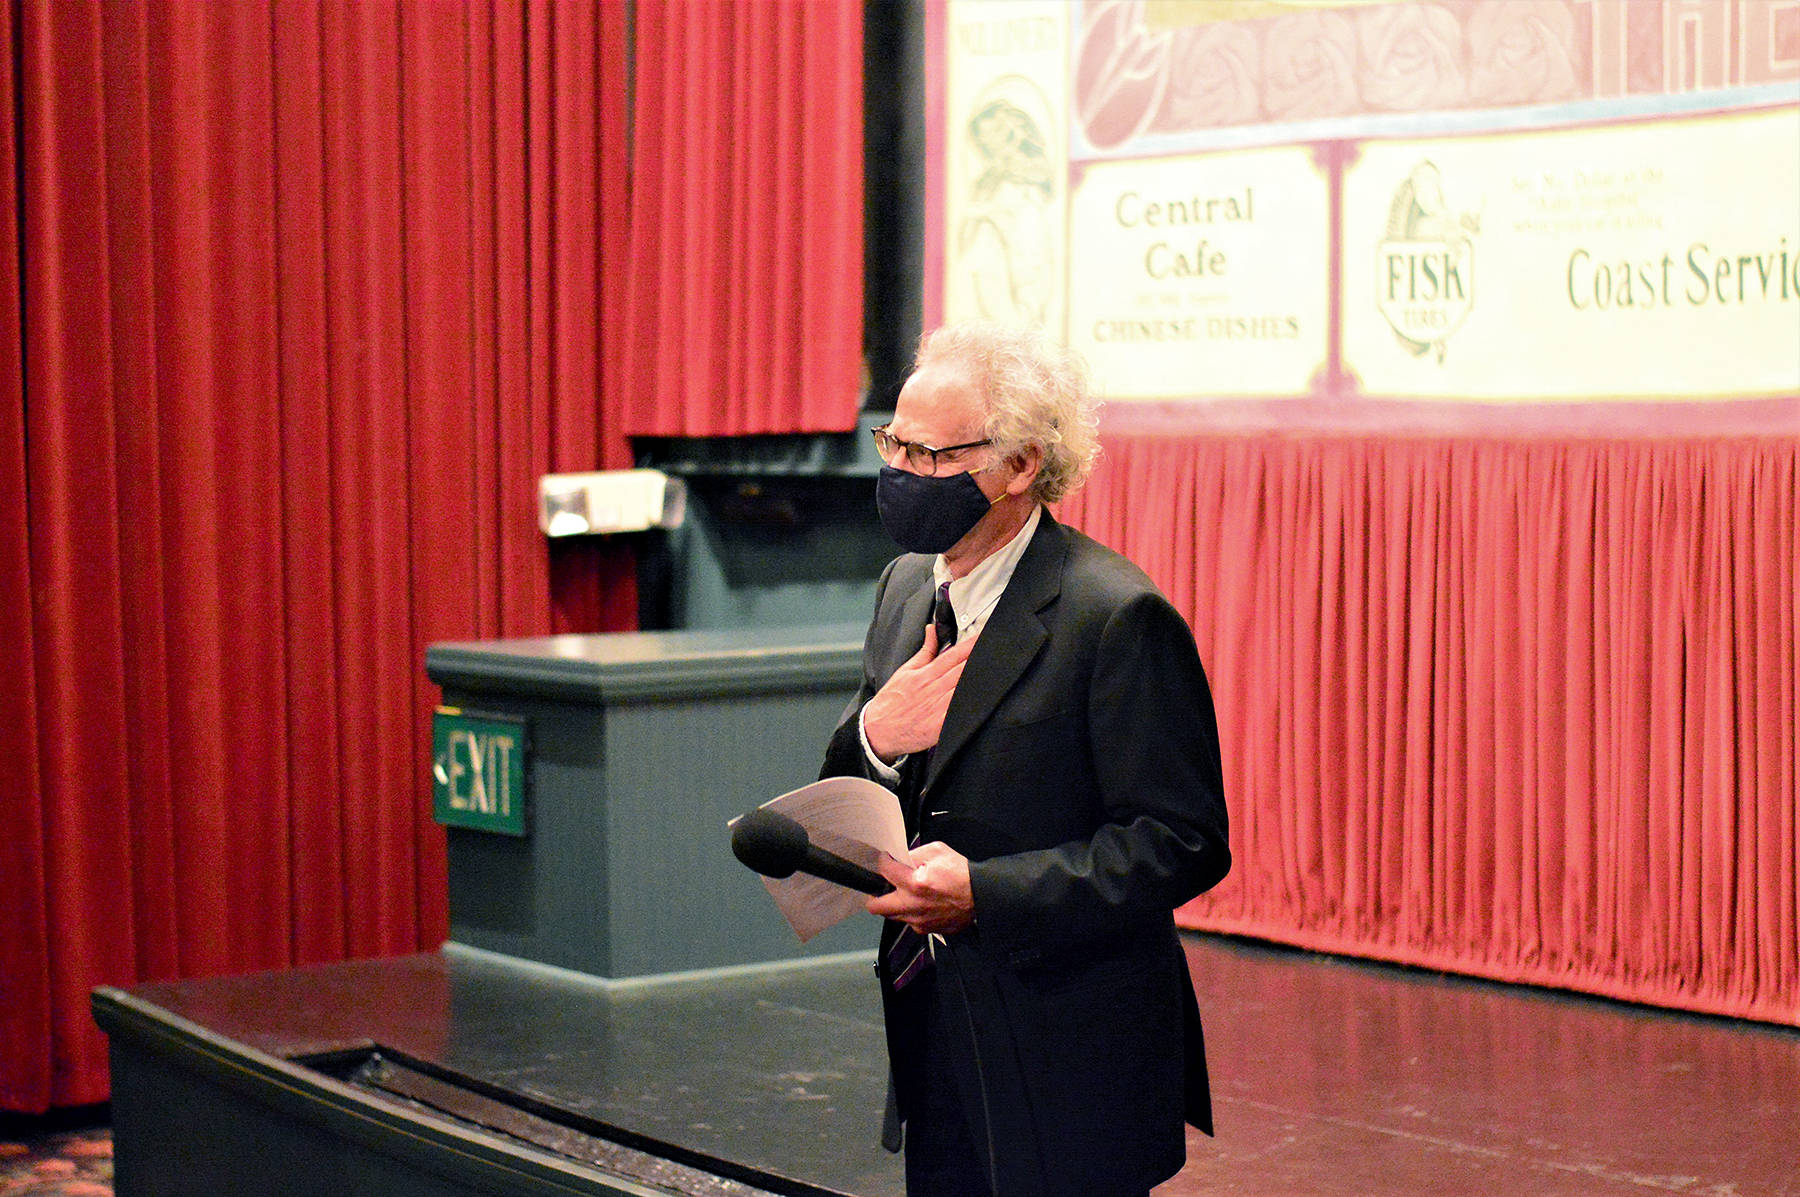 Receiving a standing ovation from the audience at the Rose Theatre on Wednesday night, owner Rocky Friedman expressed his gratitude to supporters who waited 499 days for the downtown Port Townsend cinema to reopen. Friedman also introduced his mother Miriam, 101, during his speech before the showing of the film “The Truffle Hunters,” from Italy. The two-screen movie house is using a MERV-13 air filtration system and selling two-thirds of the seats for each screening. Diane Urbani de la Paz/Peninsula Daily News